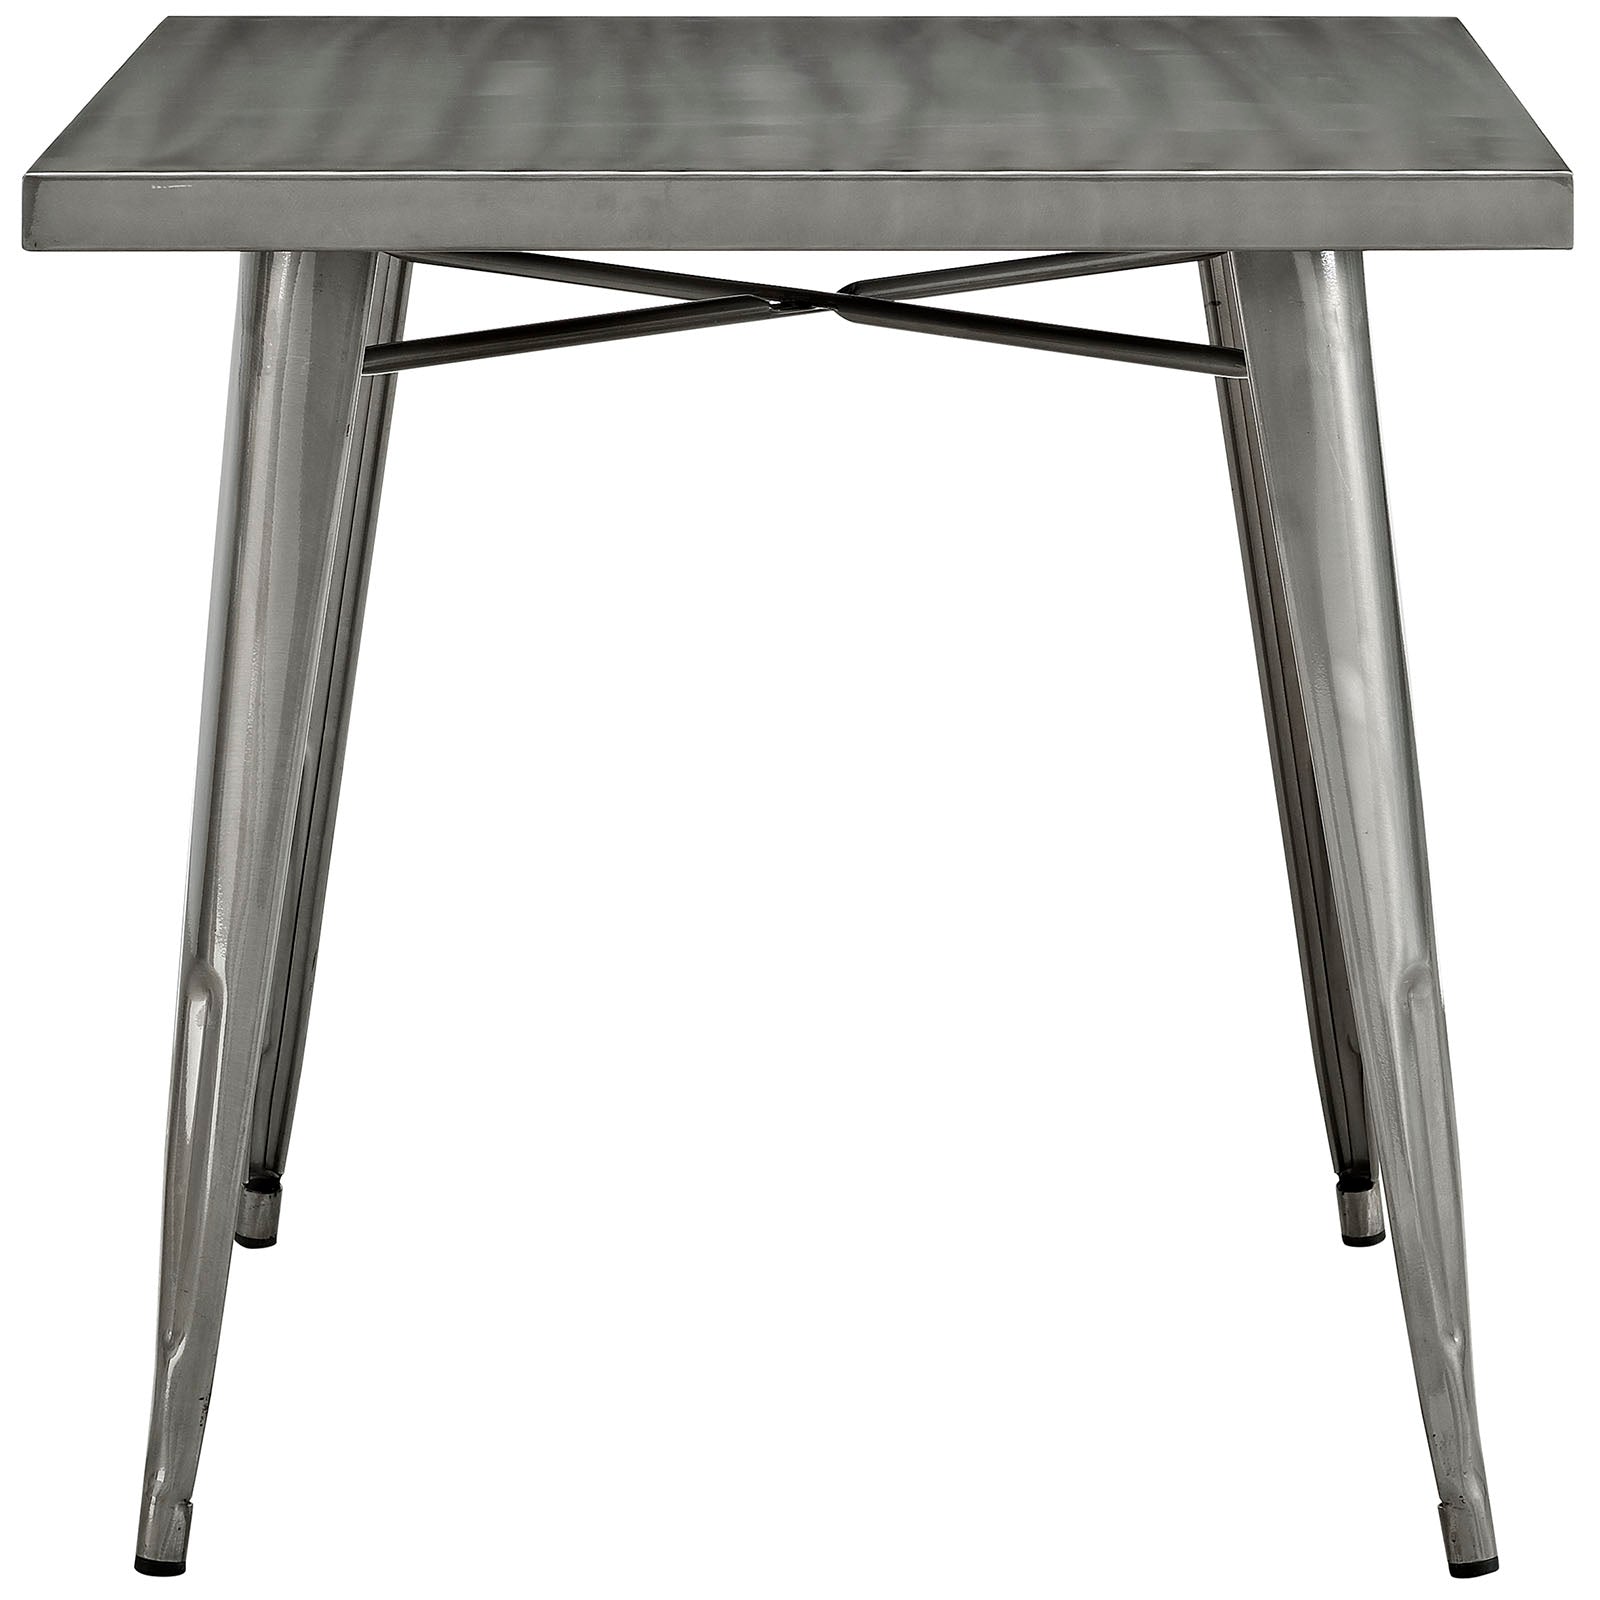 Modway Dining Tables - Alacrity Square Dining Table Gunmetal